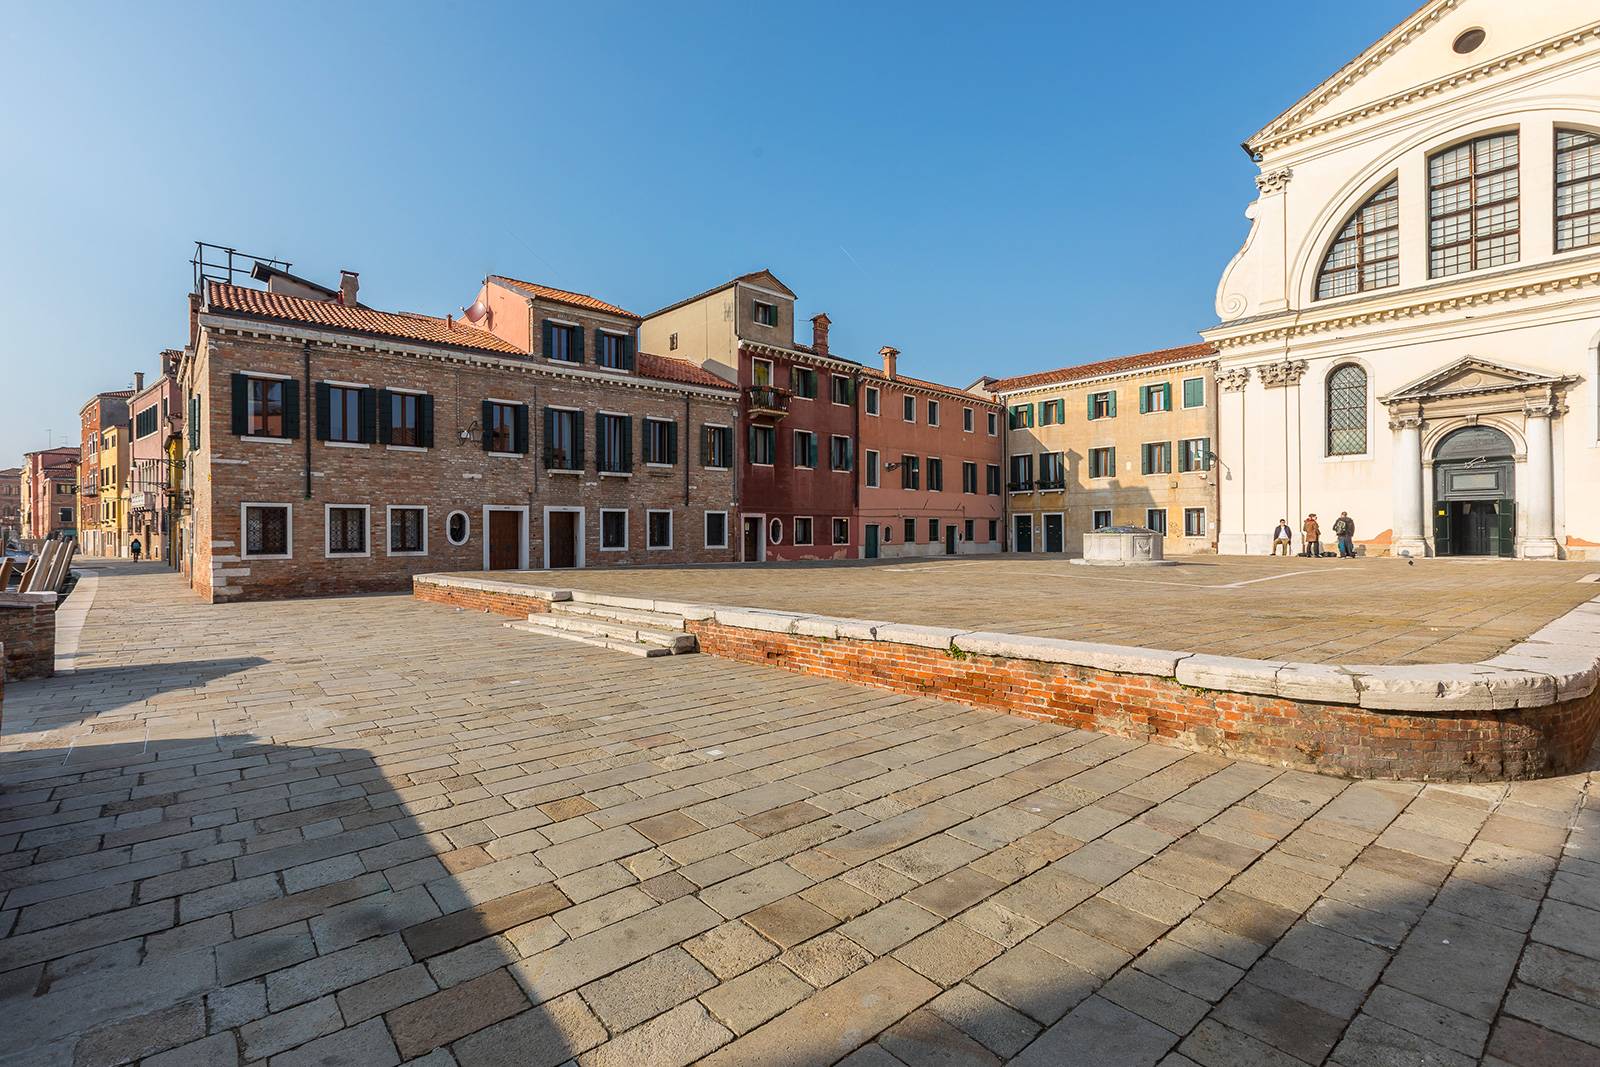 it is strategically located in San Trovaso, with open views over Canal, Square and Church